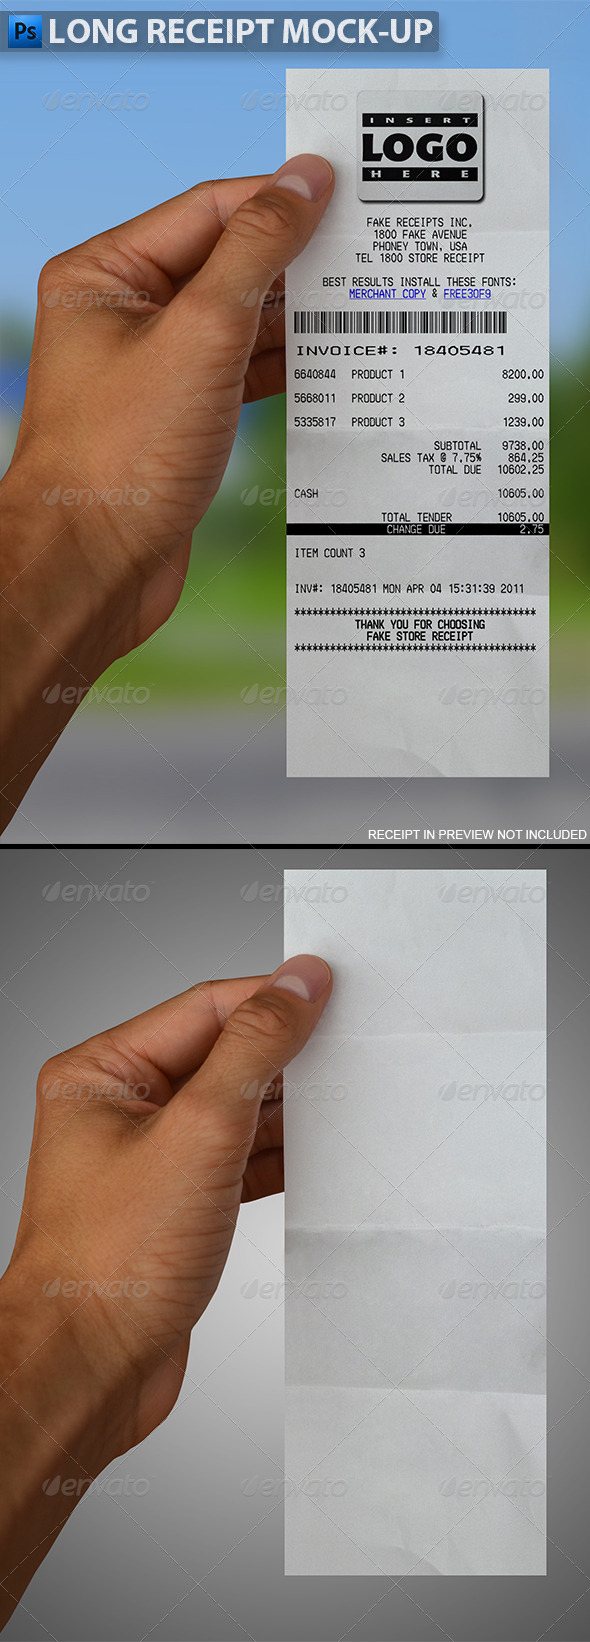 Download Long Receipt in Hand Mock-up by themedia | GraphicRiver